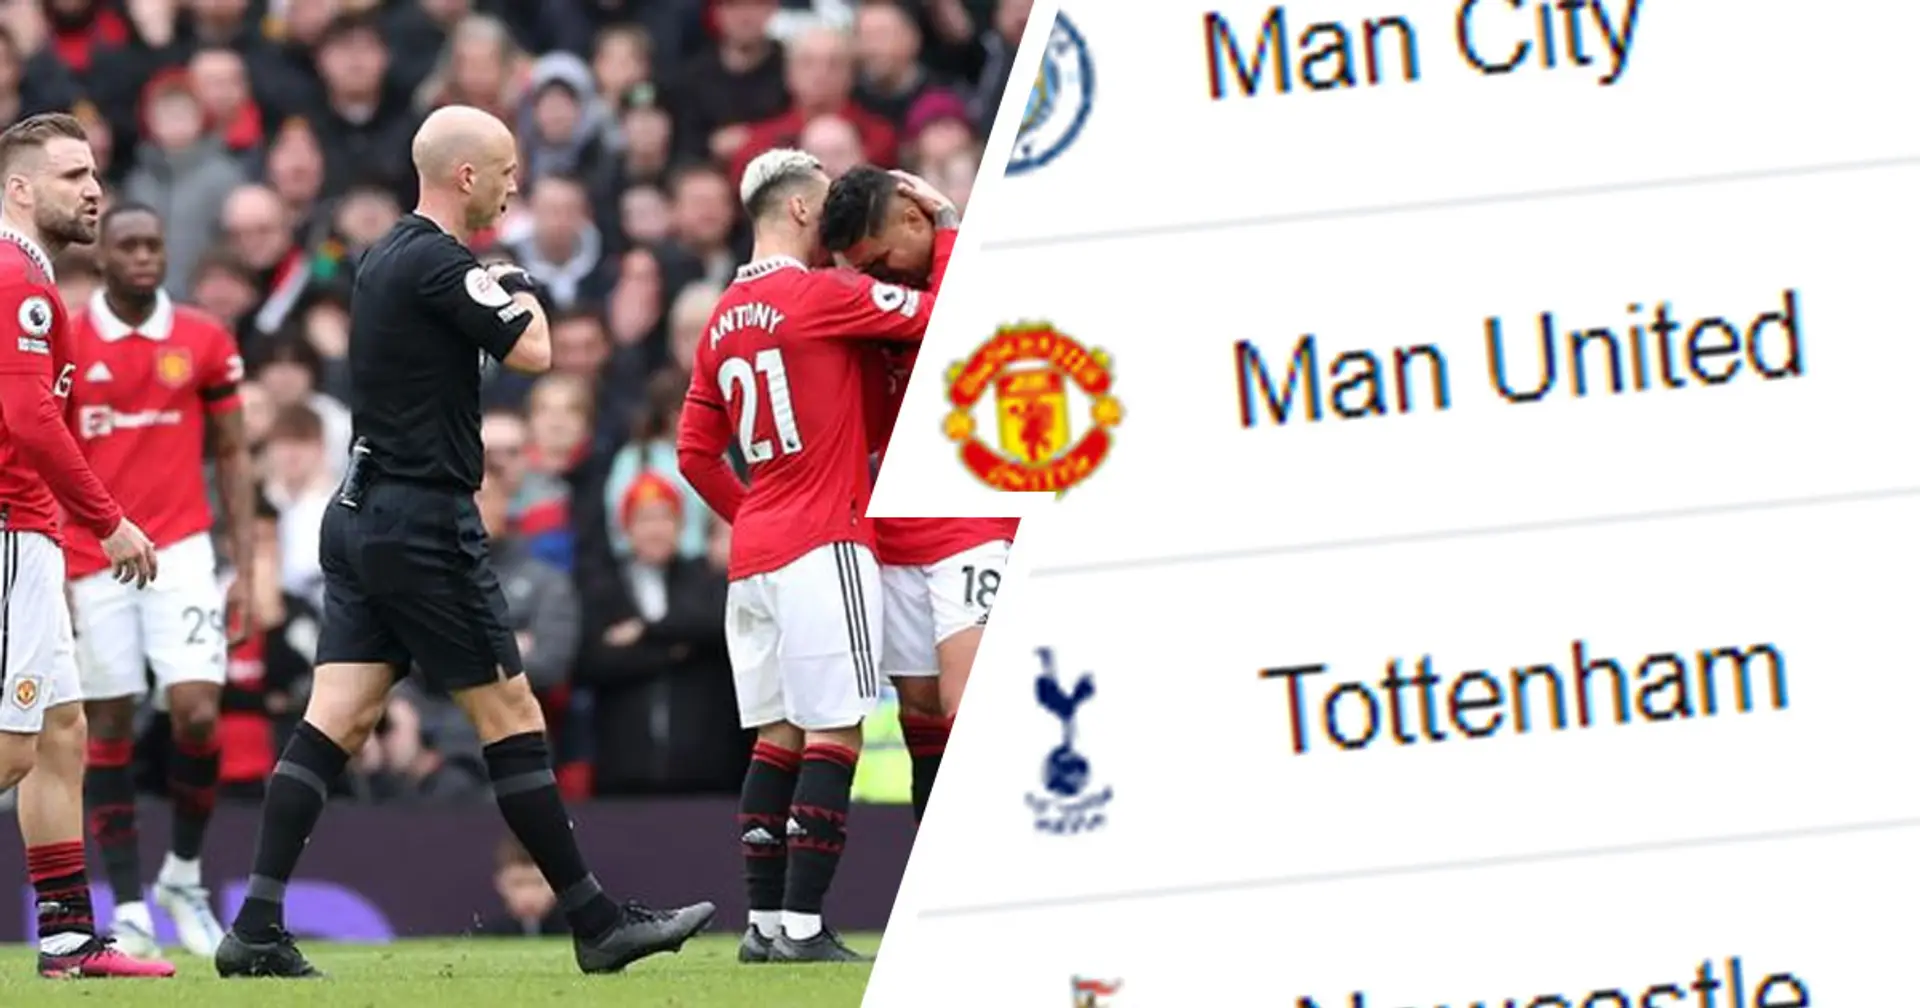 United fall further behind top-2: latest Premier League standings after matchday 27